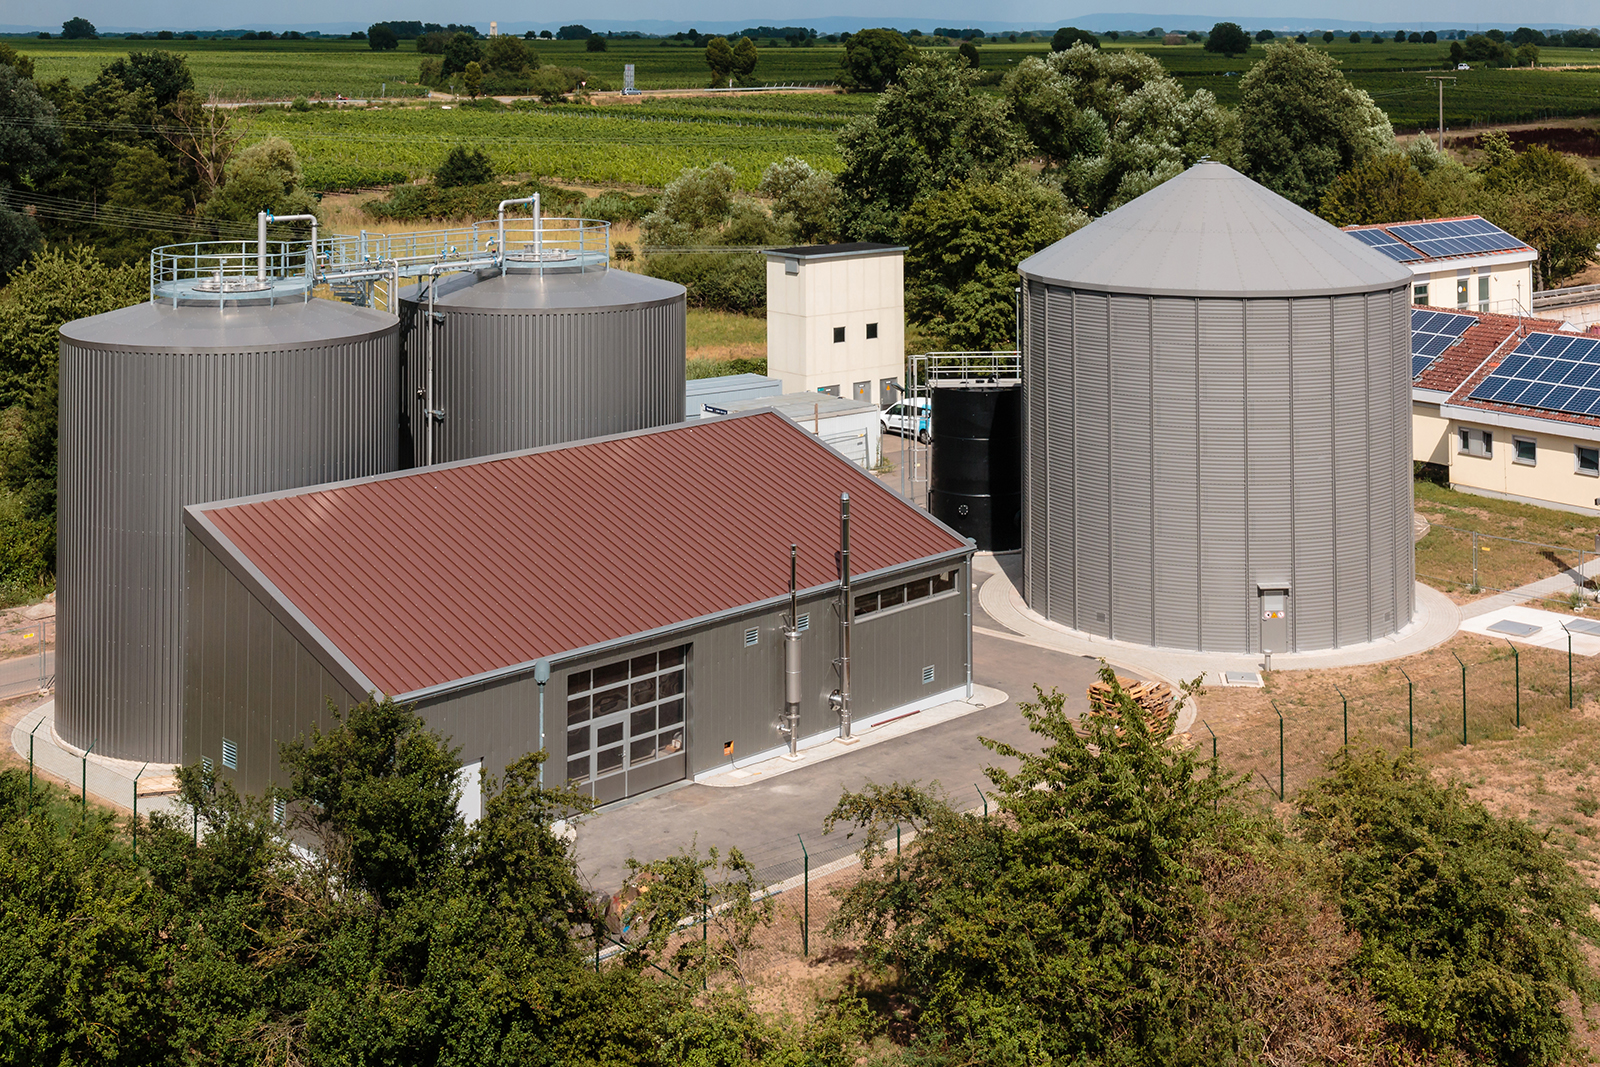 The two-stage high-load anaerobic digestion system in Edenkoben allows the wastewater treatment plant to cope with a higher effluent load during the wine harvest.